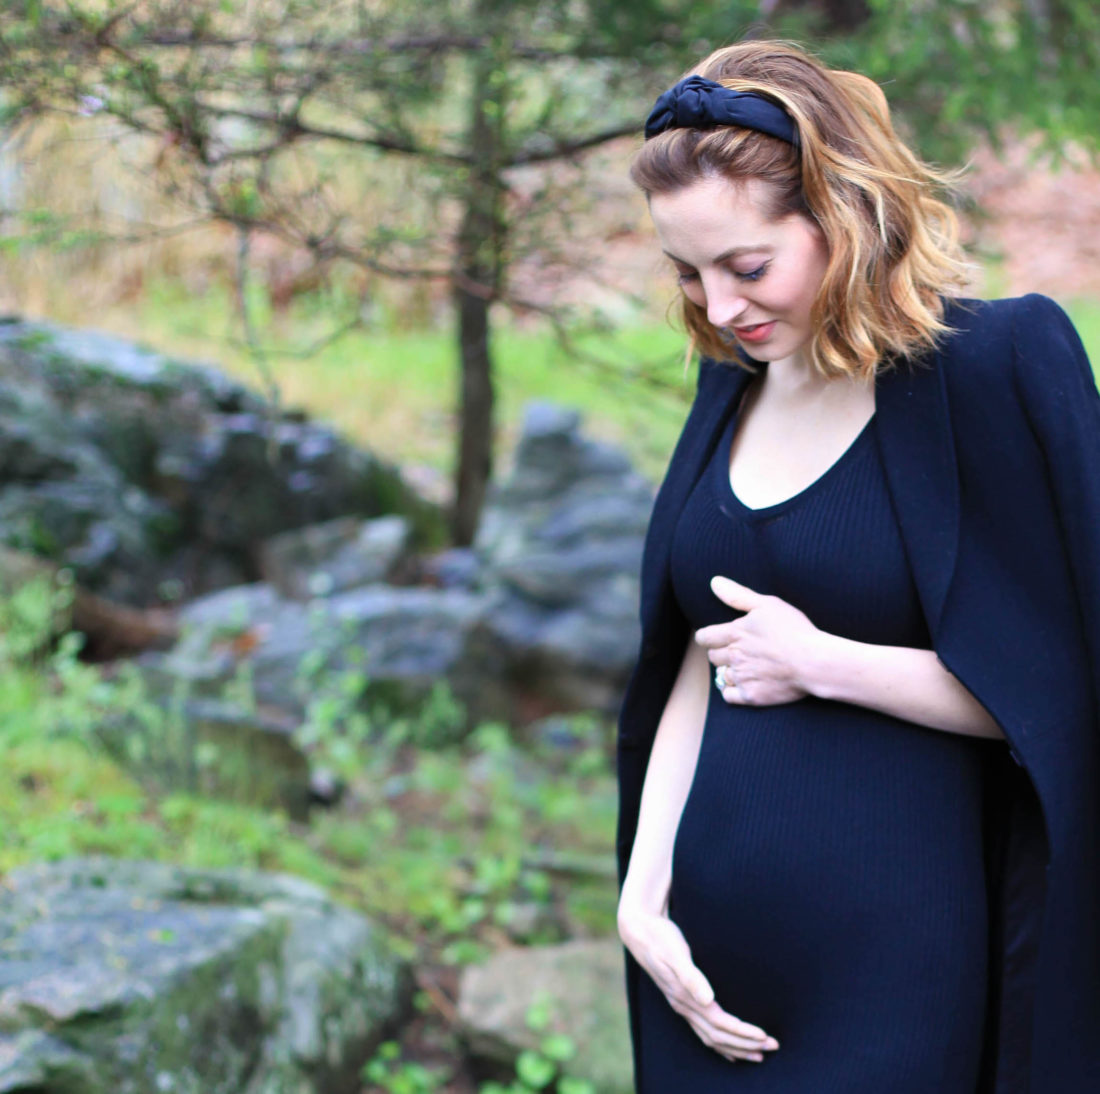 Blogger Eva Amurri shares her feelings about pregnancy after miscarriage